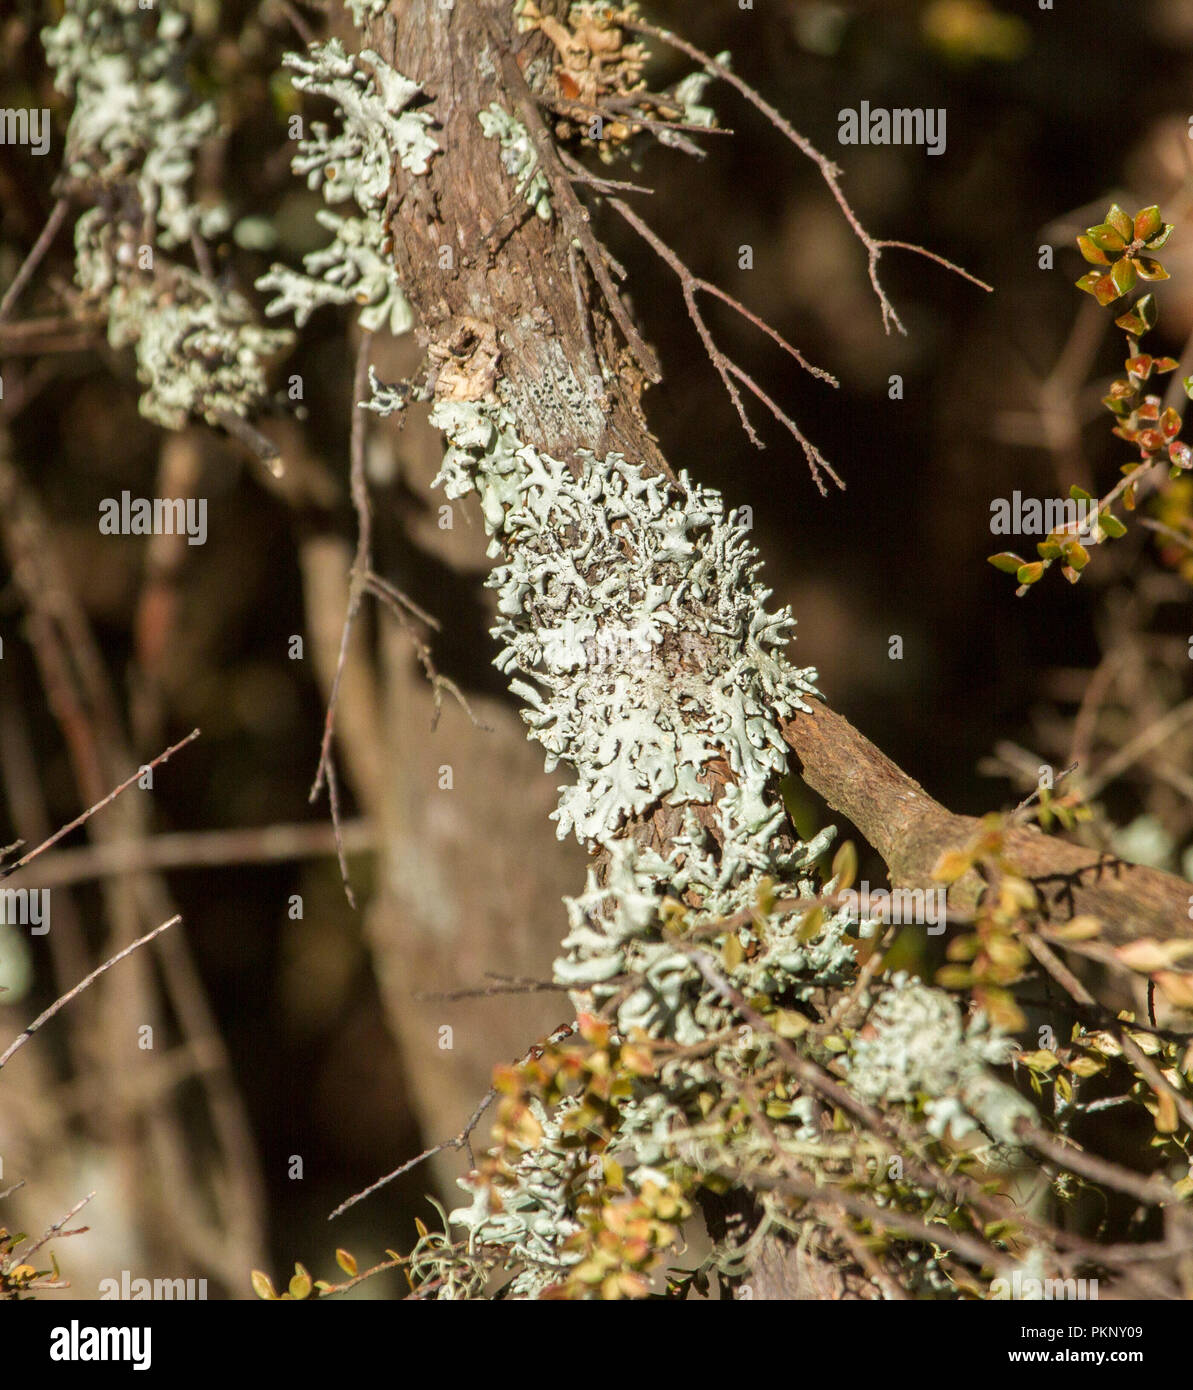 Pale green / white lichen growing on tree trunk at Barrington Tops National Park NSW Australia Stock Photo